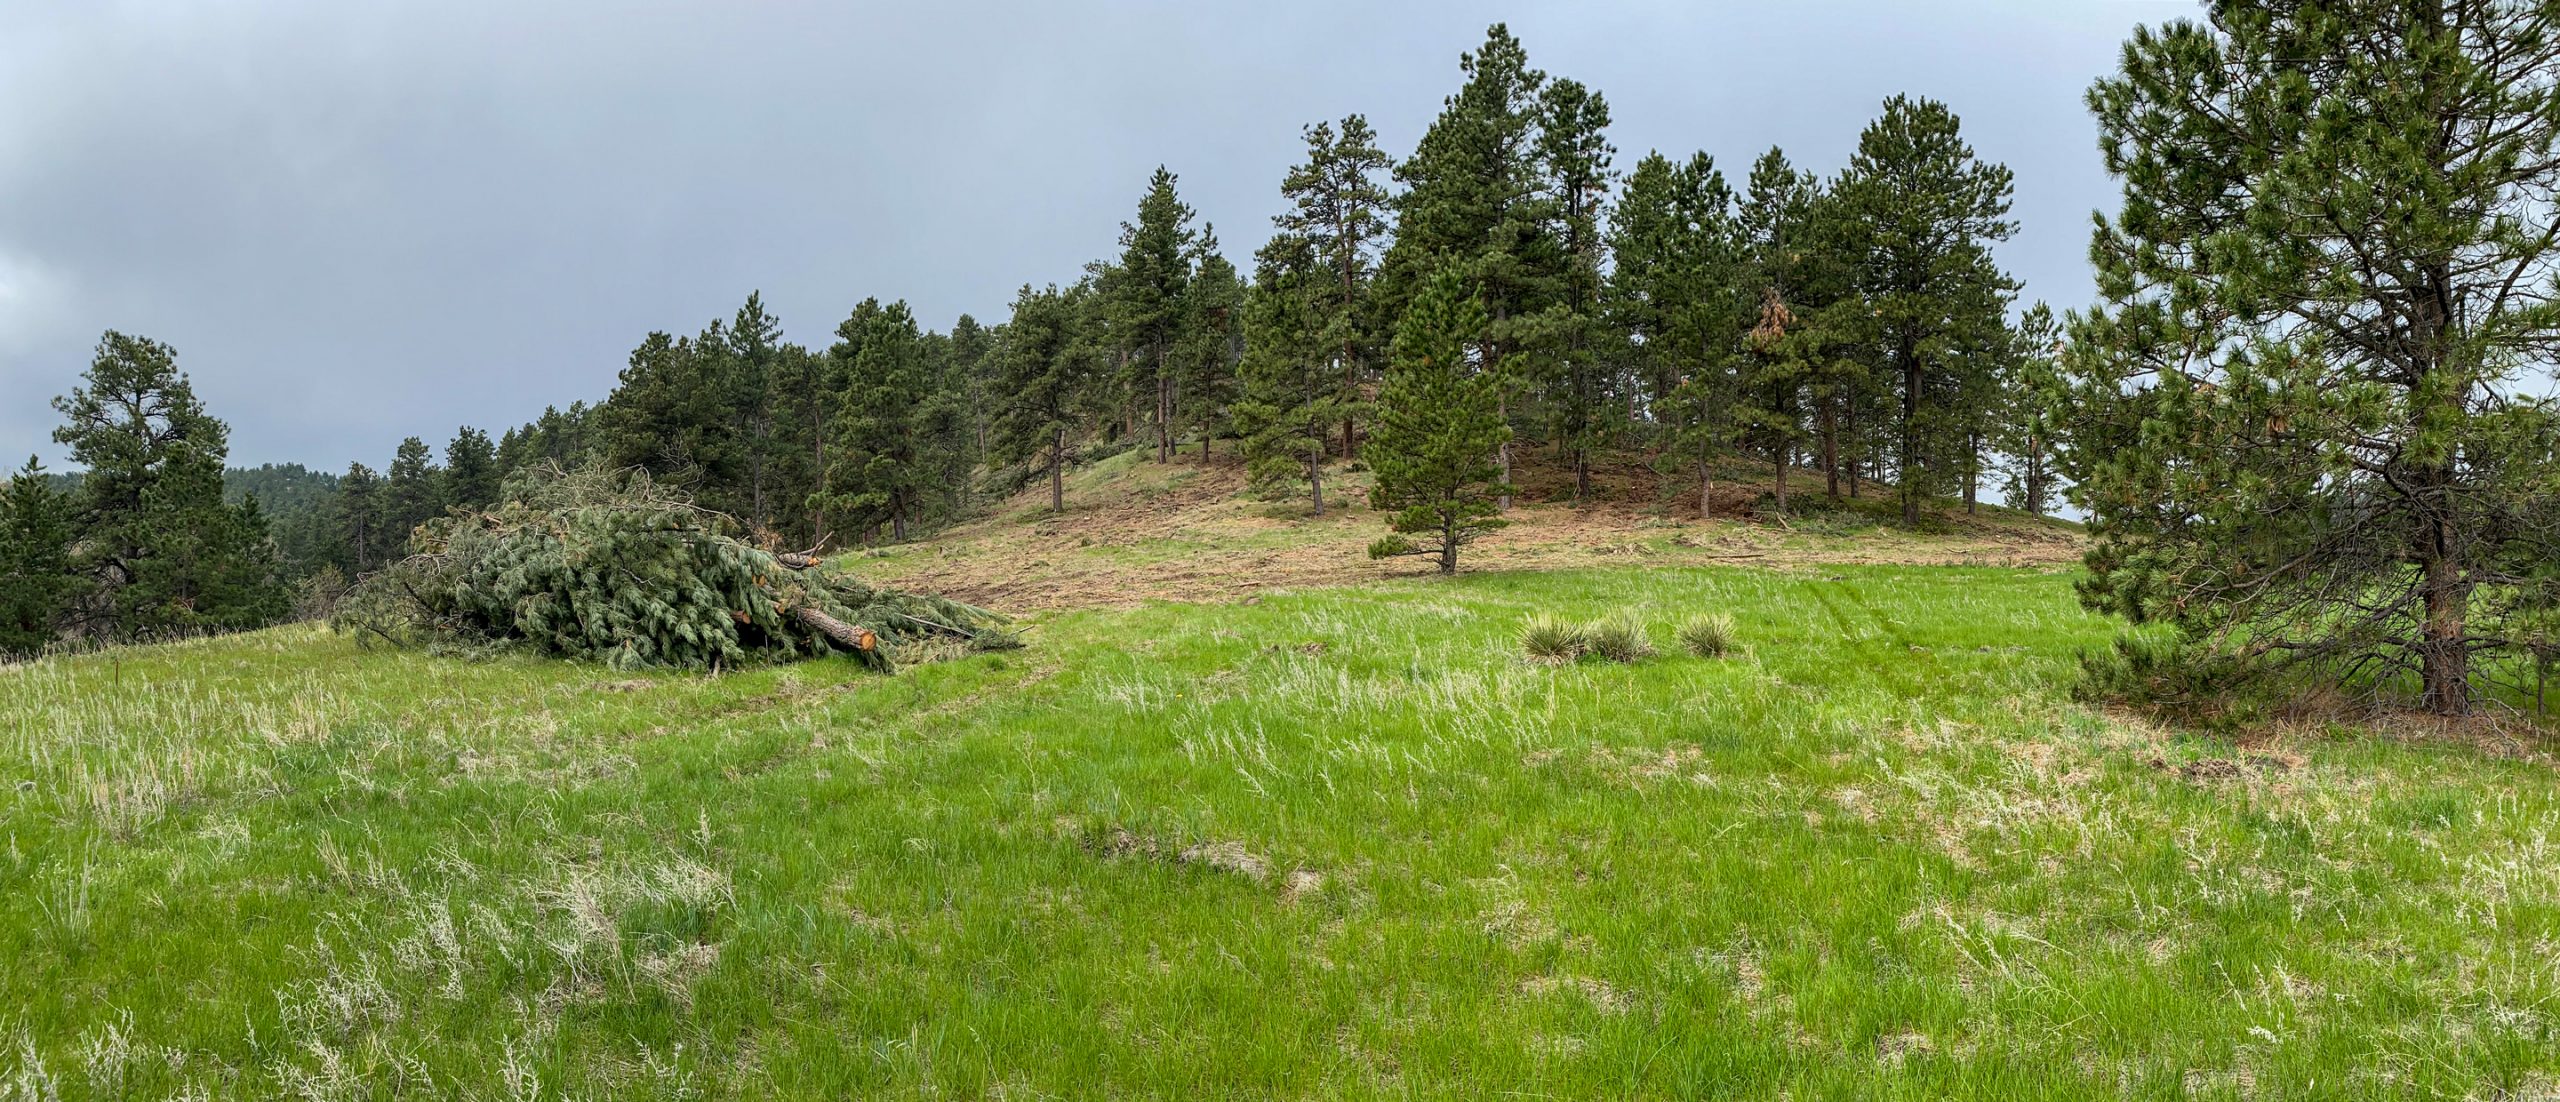 field edge of a pine forest with stacks of trees that have been removed for fire mitigation